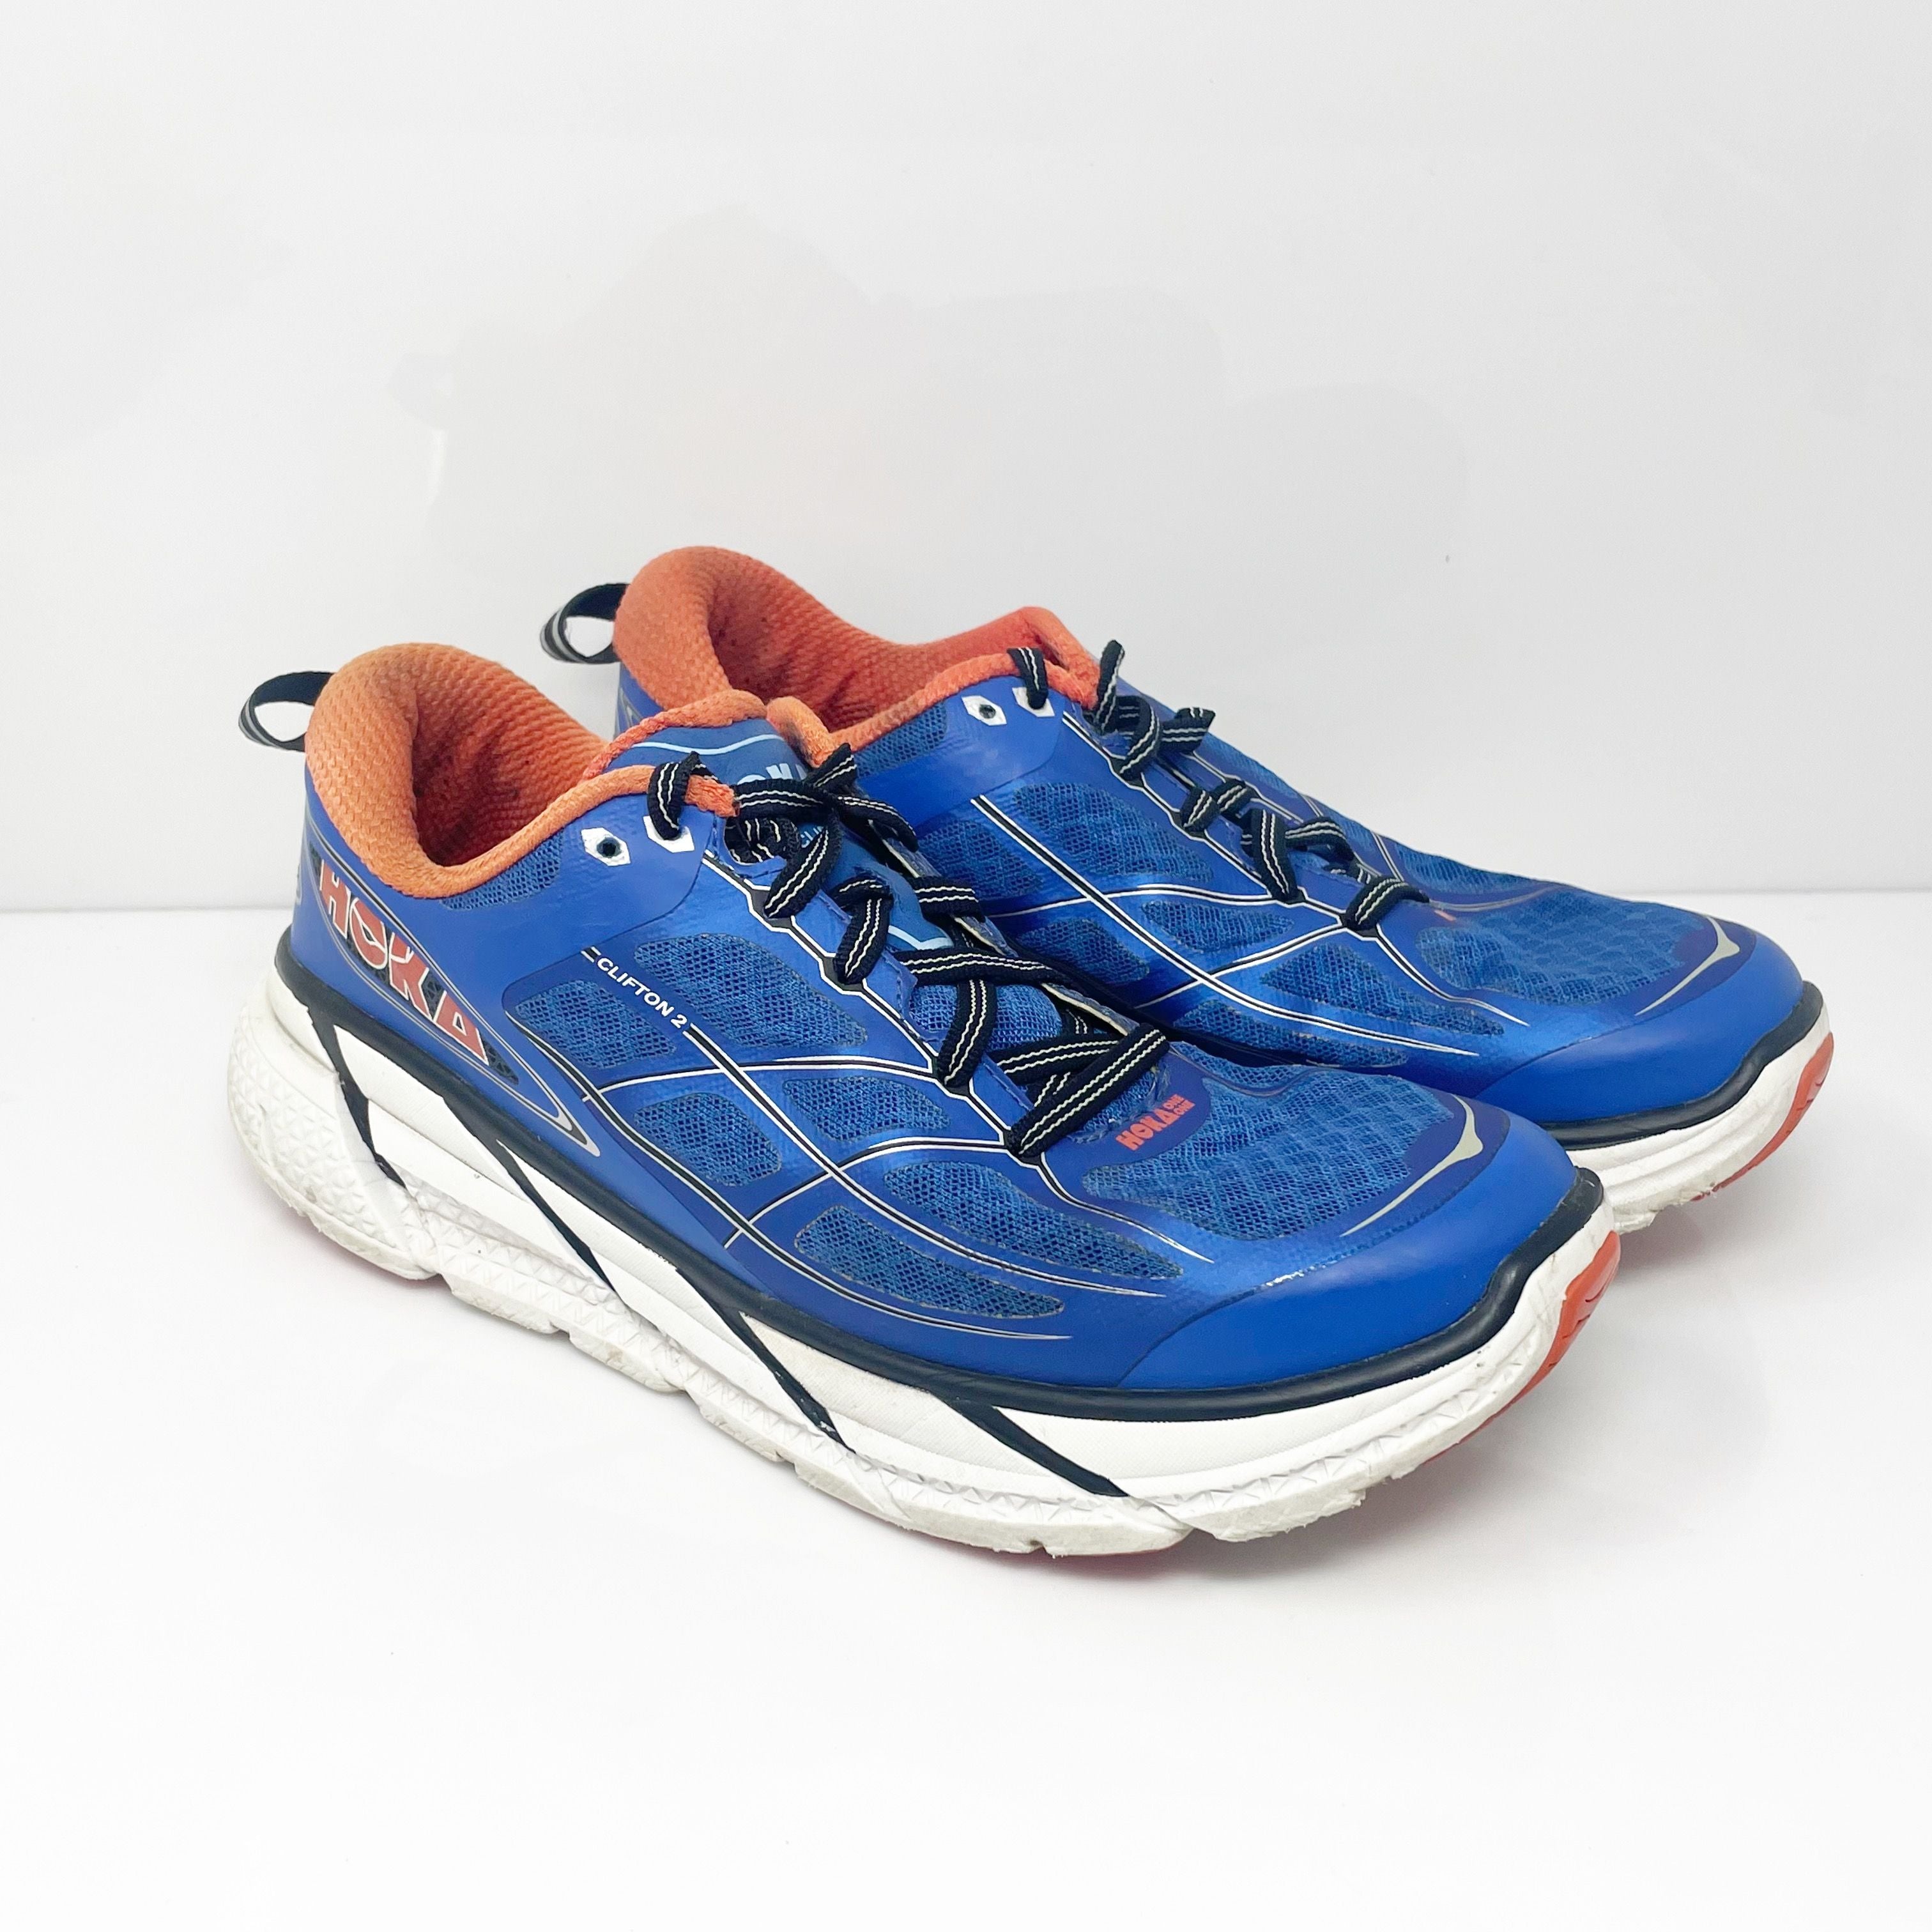 Hoka One One Mens Clifton 2 1008328 TBOF Blue Running Shoes Sneakers S ...